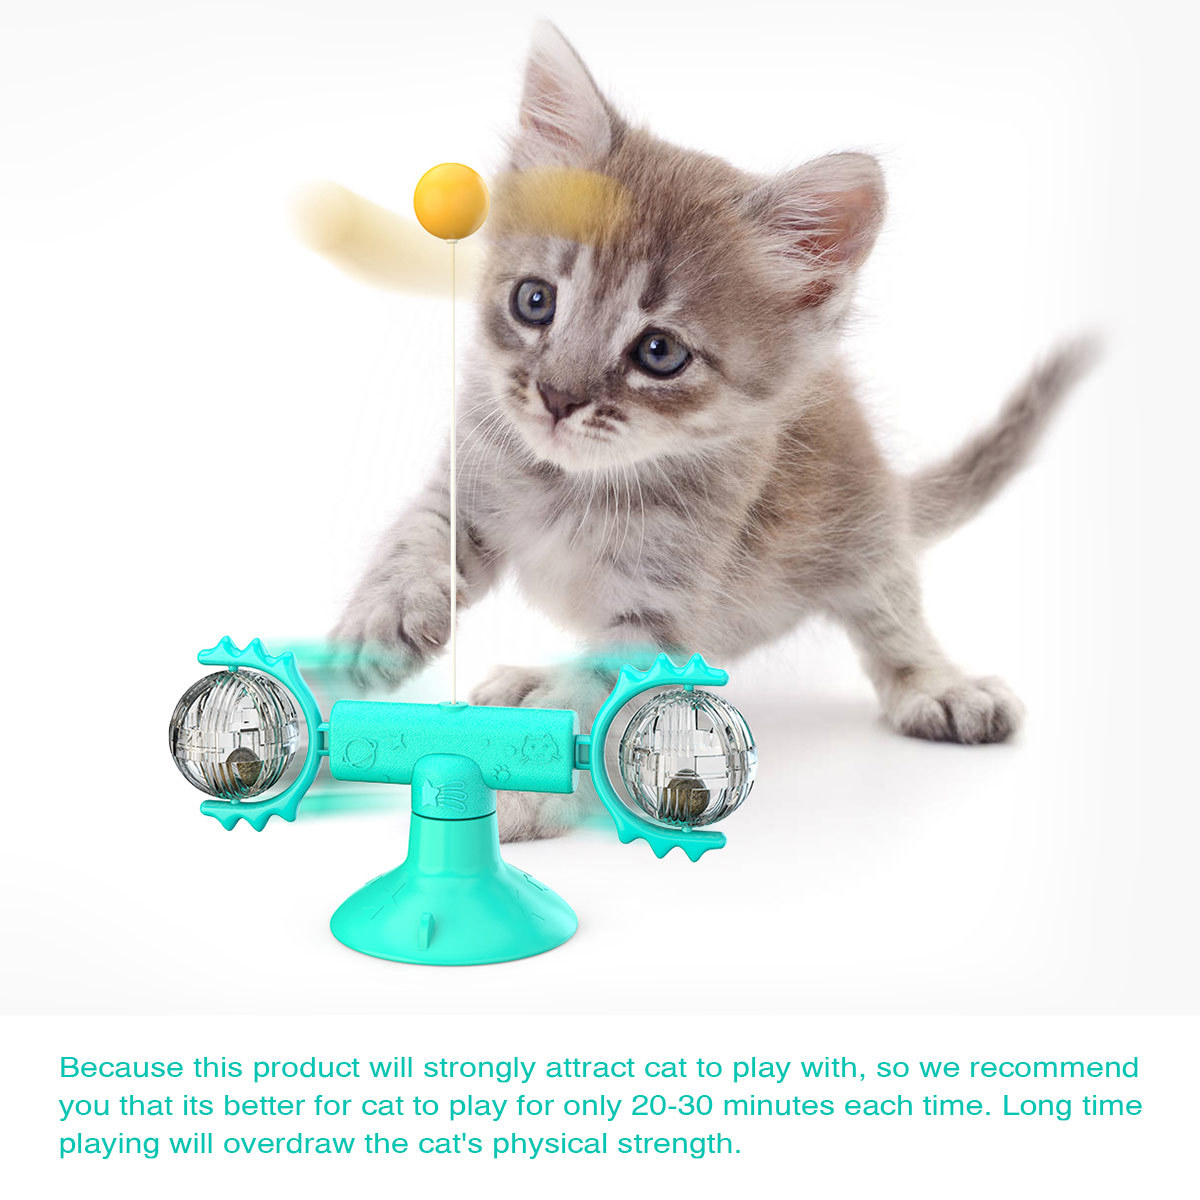 Swing-Toys-for-Cats-Interactive-Portable-Scratch-Hair-Brush-Cat-Toy-With-Catnip-Funny-Pet-Products-f-1798510-7